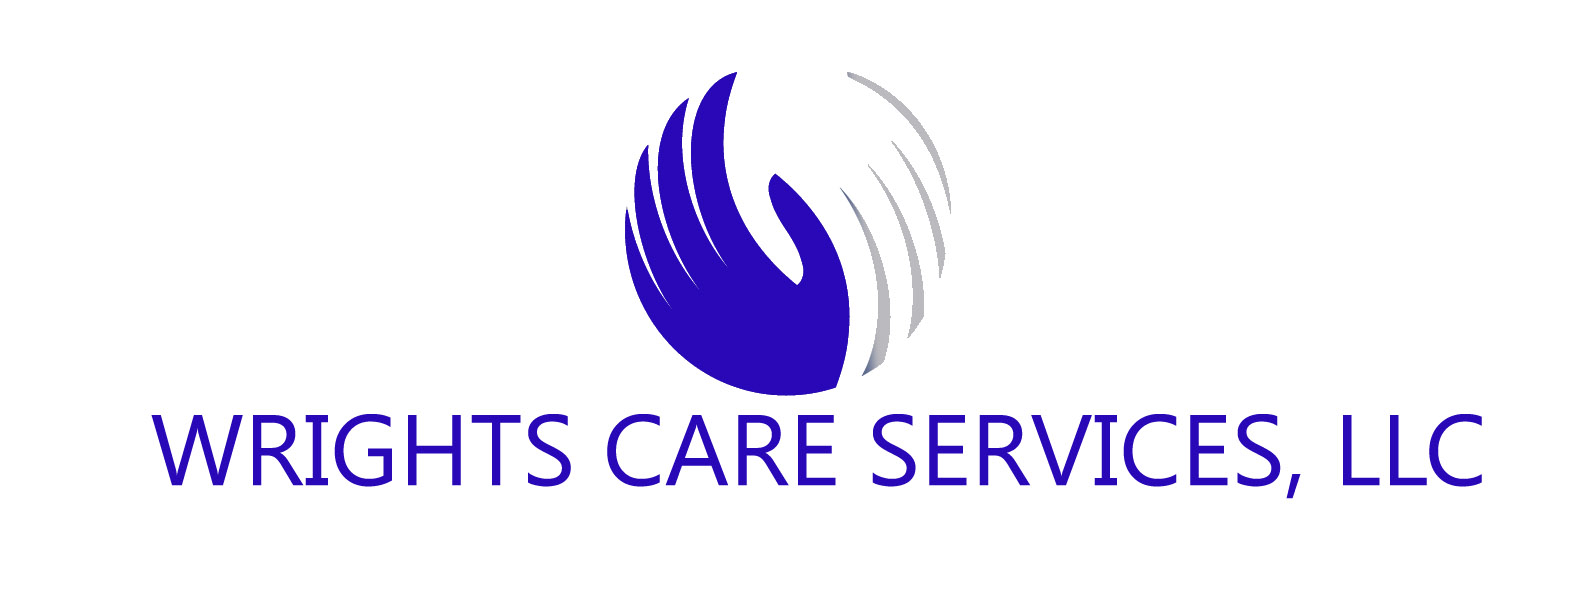 Reketta Wright/Wrights Care Services